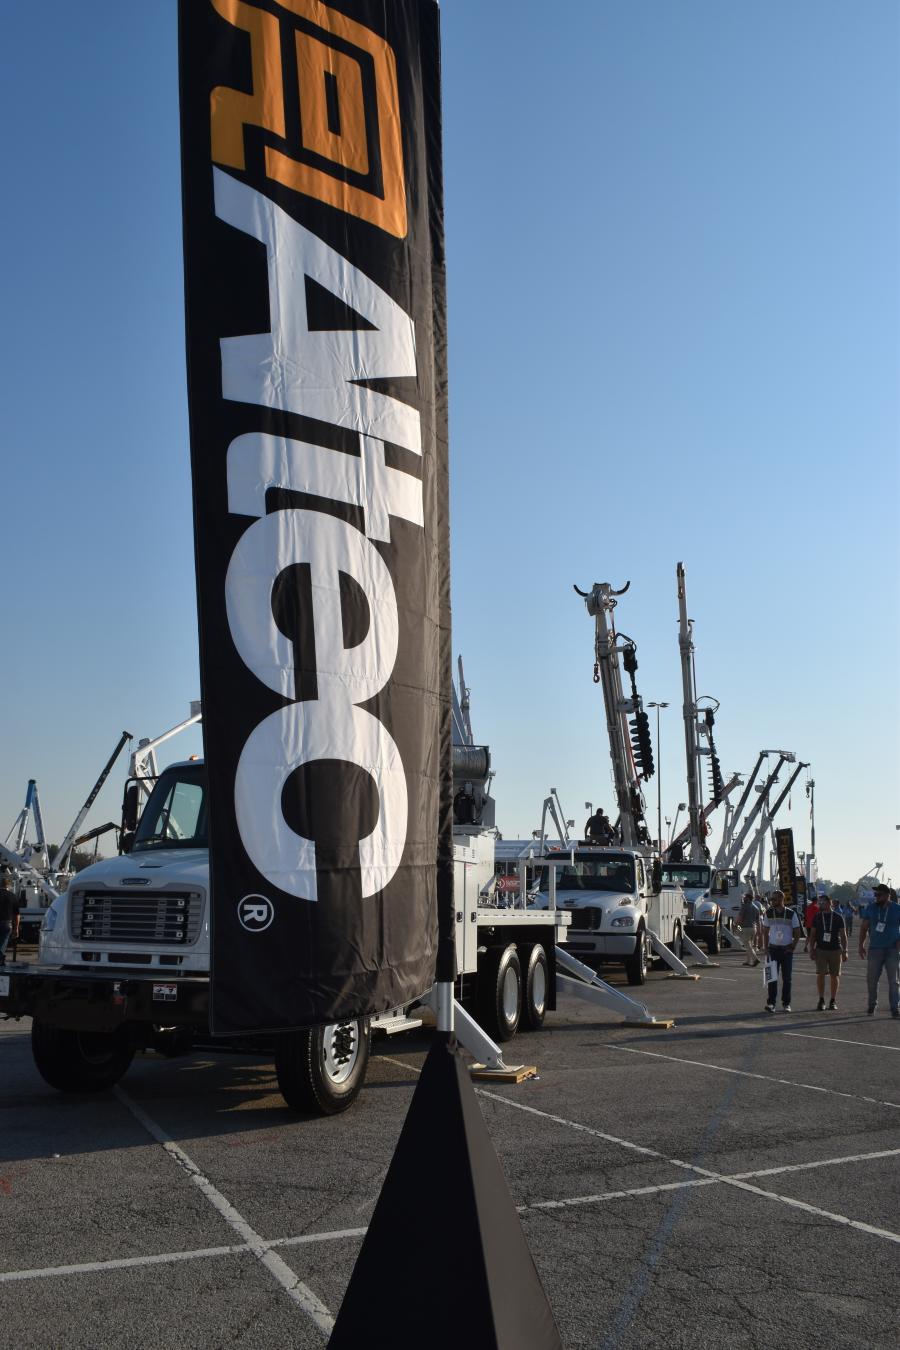 With one of the largest outdoor exhibits at the show, and certainly one of the busiest exhibits, Altec is an industry-leading provider to electric utilities, telecommunications, tree care specialists and contractors.